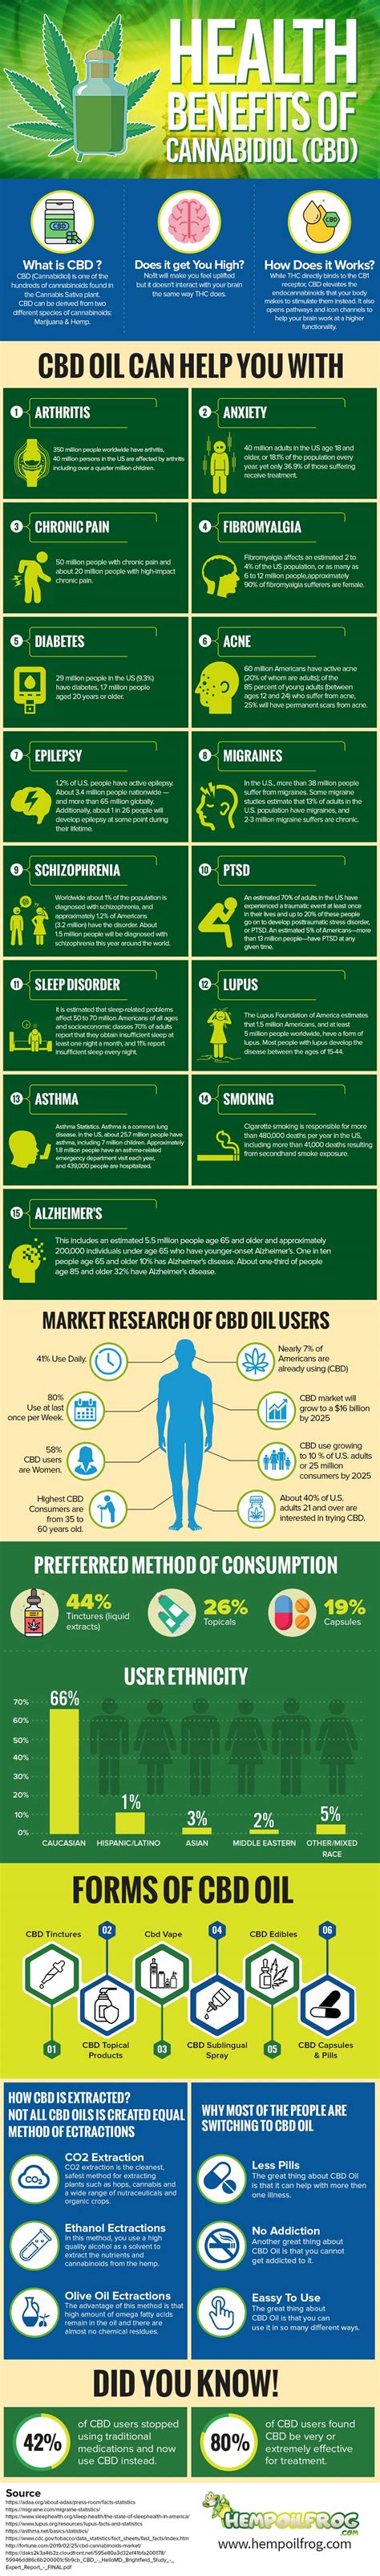 Healthy Benefits of CBD Oil [Infographic]